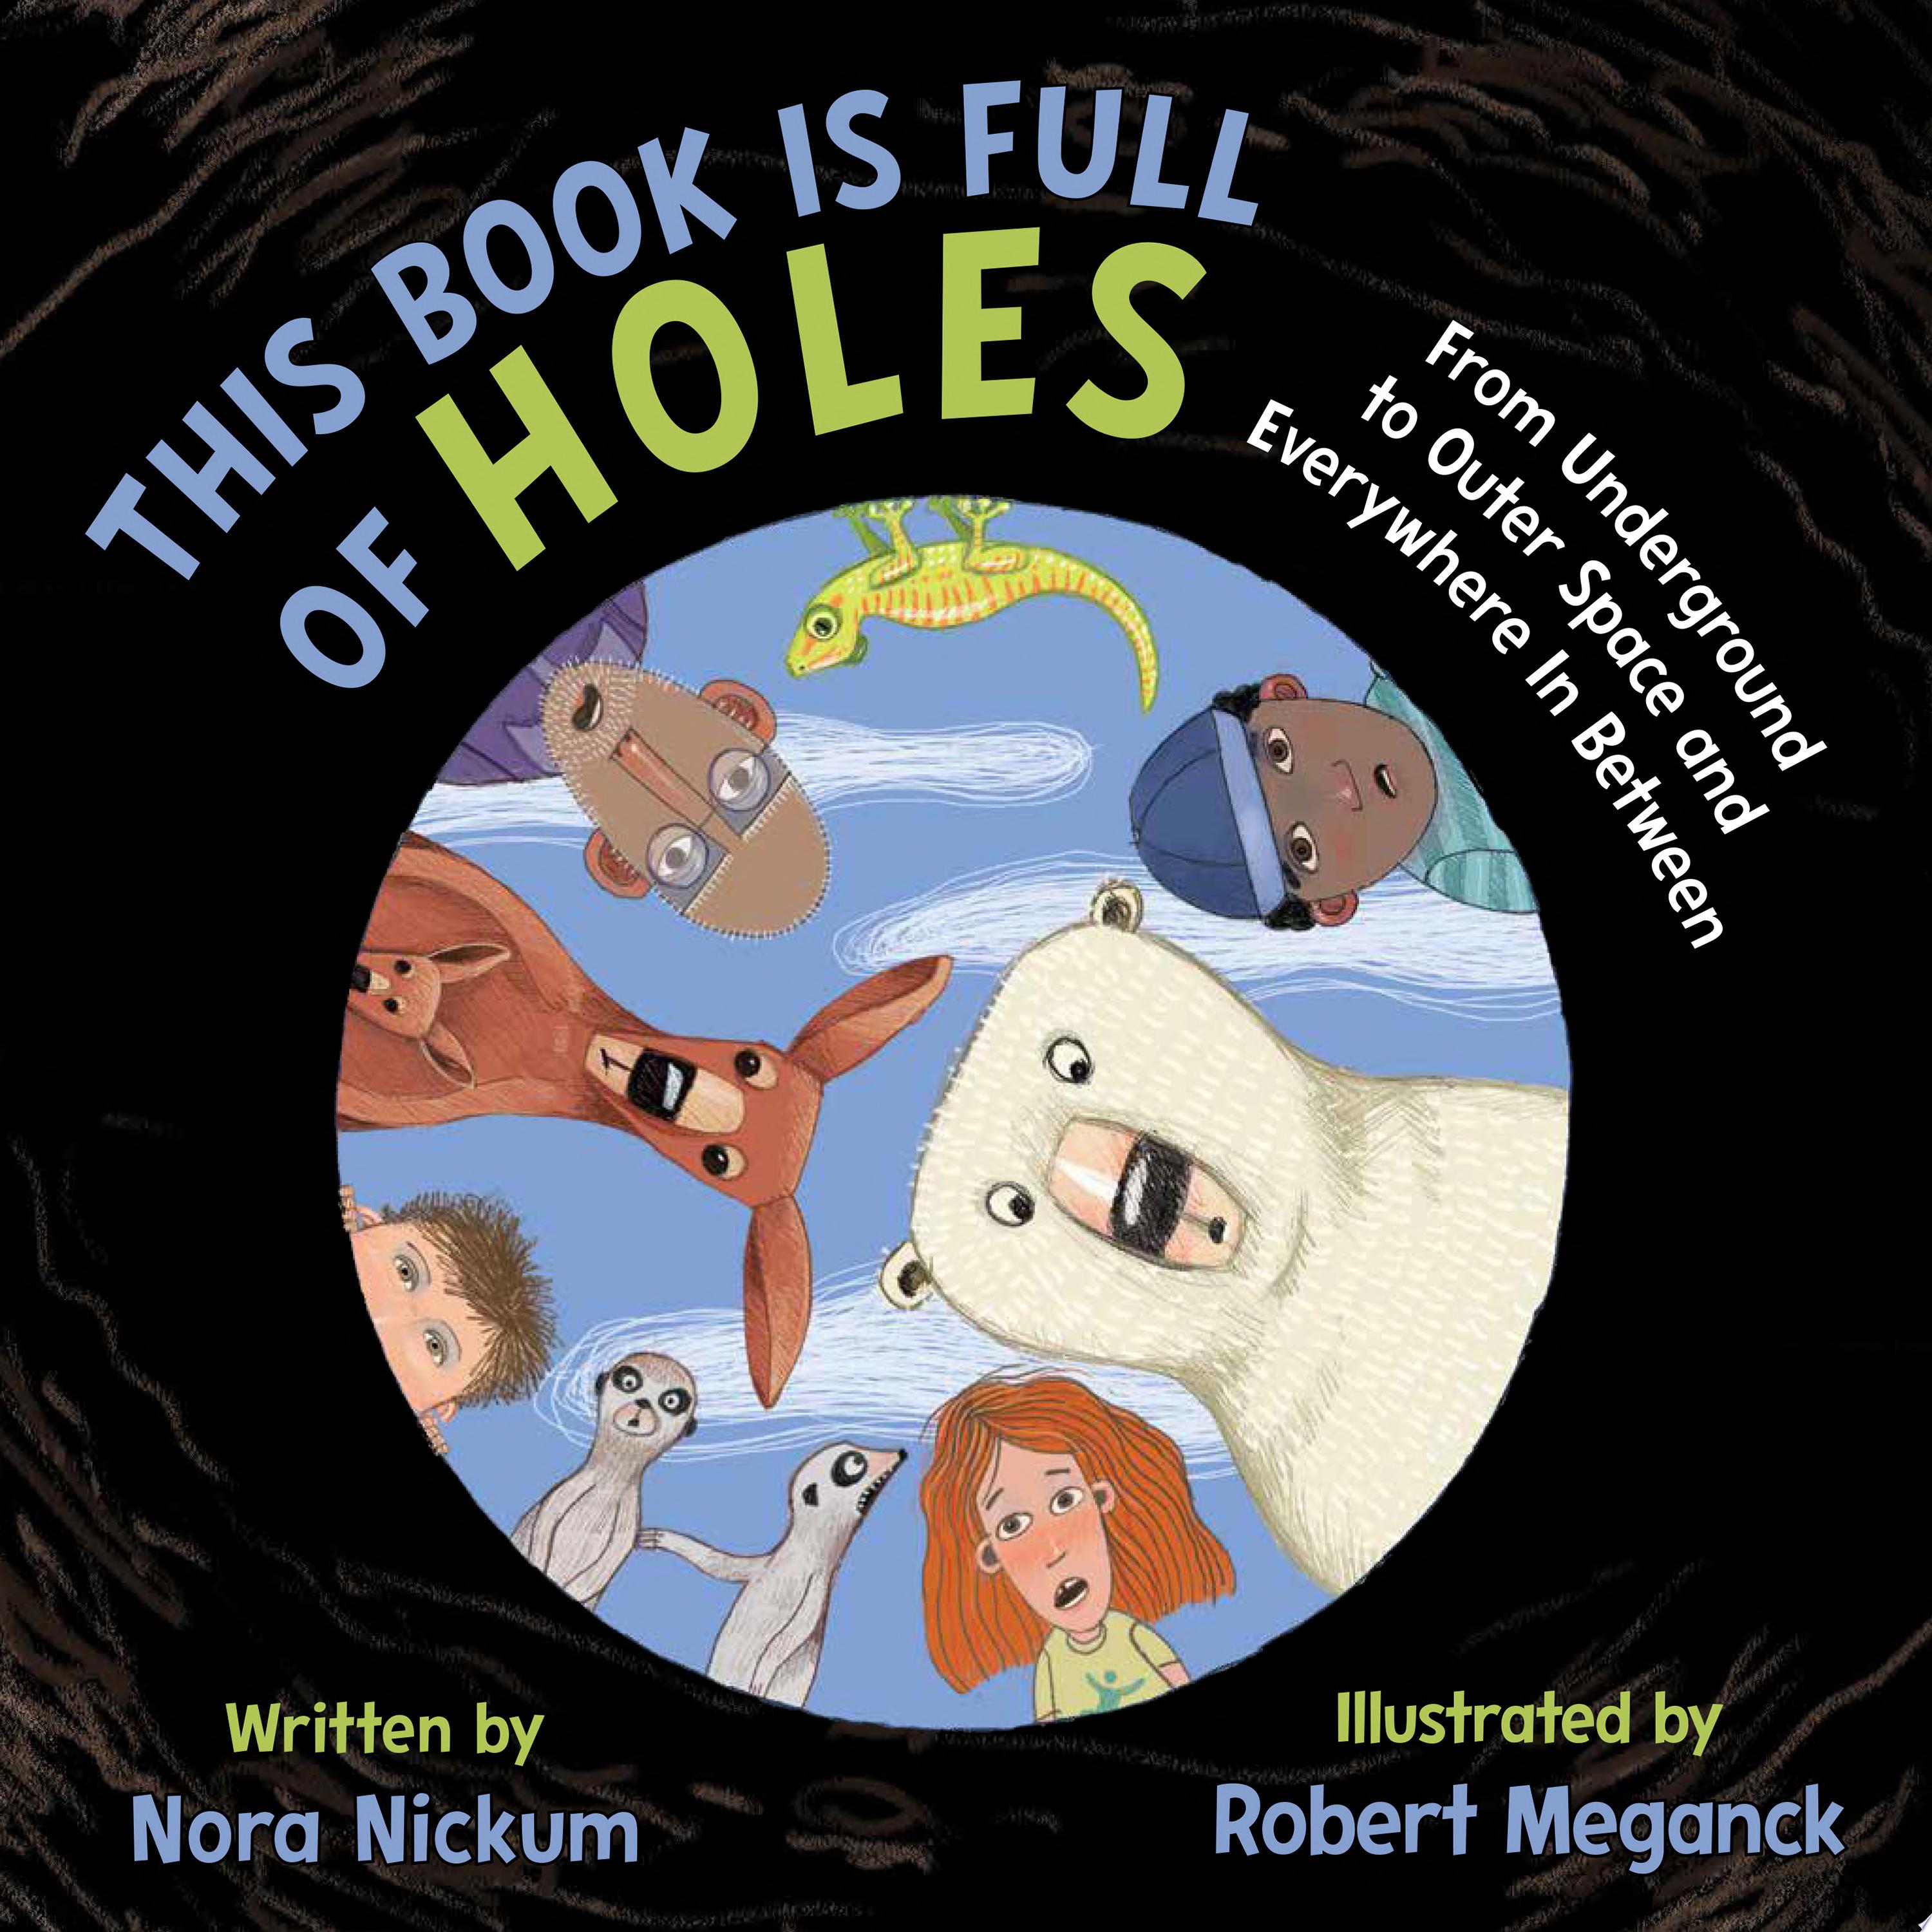 Image for "This Book Is Full of Holes"